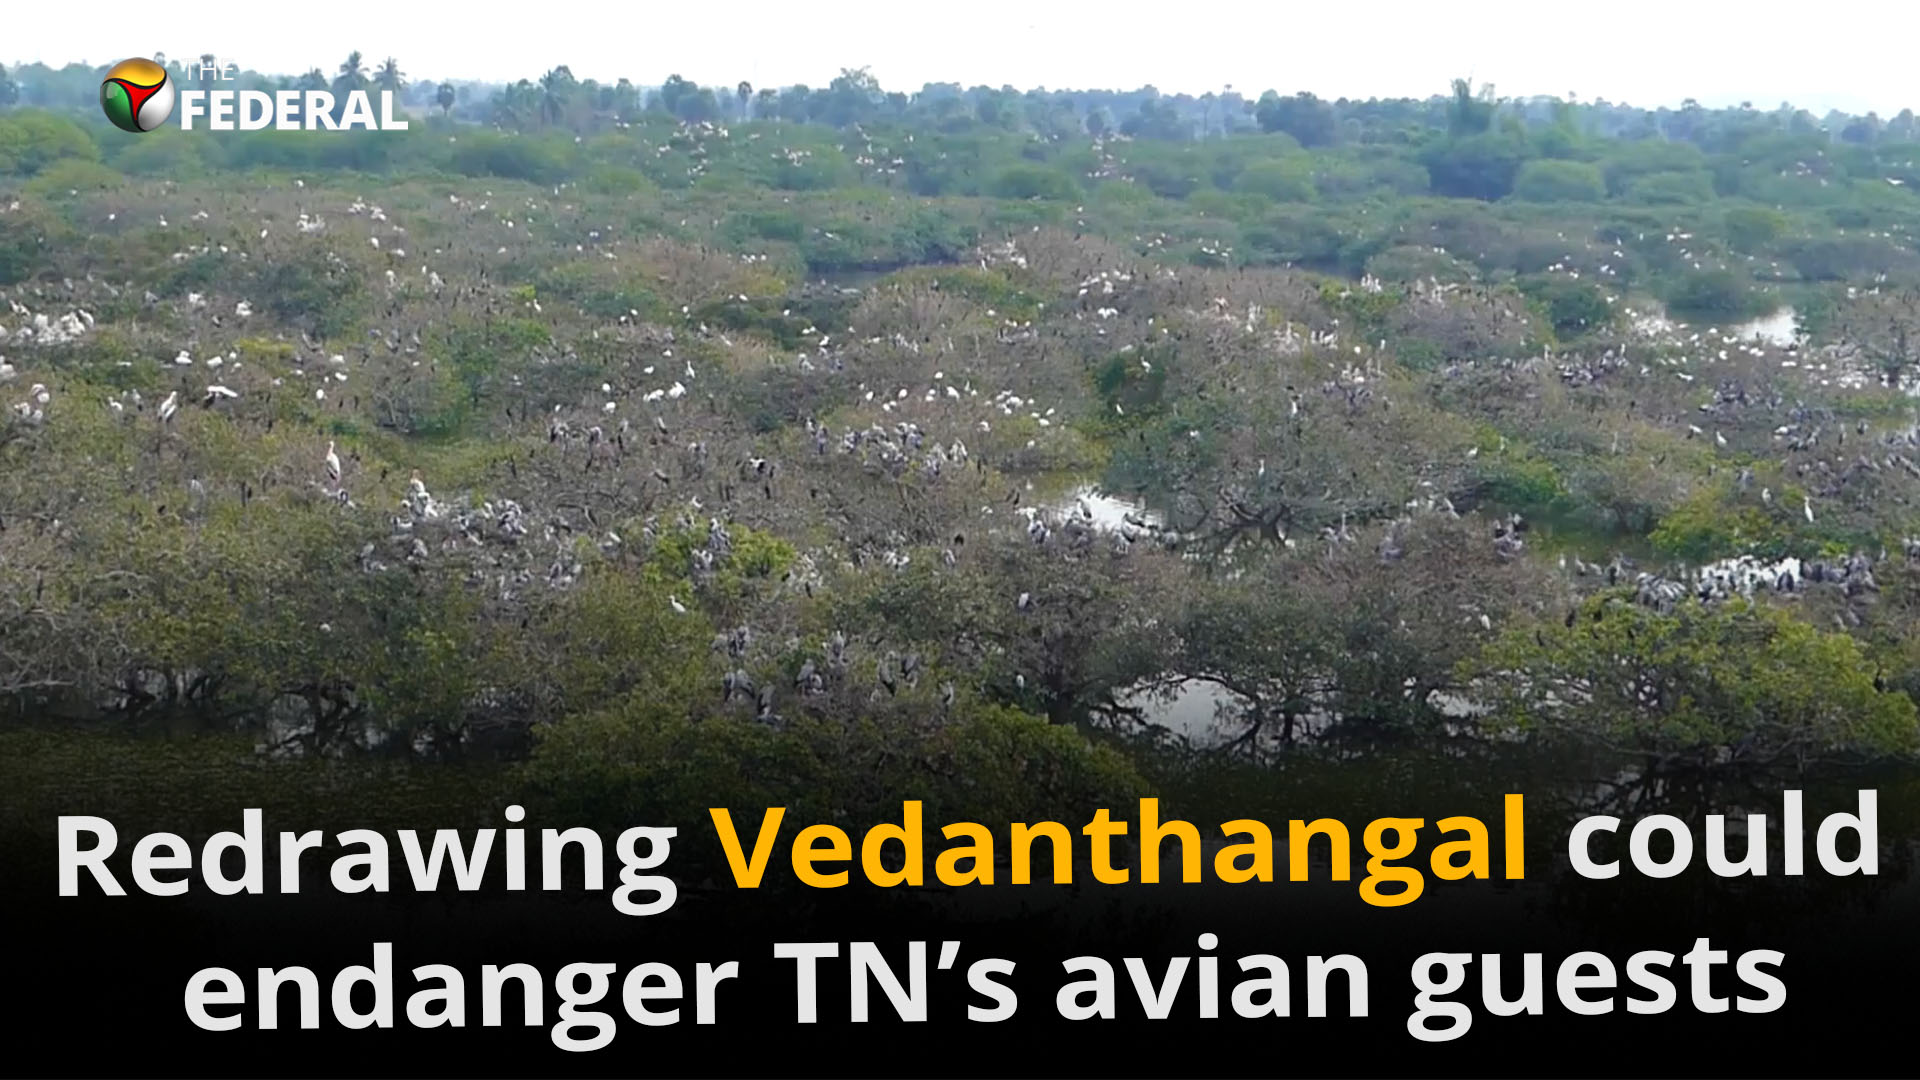 Why redrawing Vedanthangal could endanger TN’s avian guests